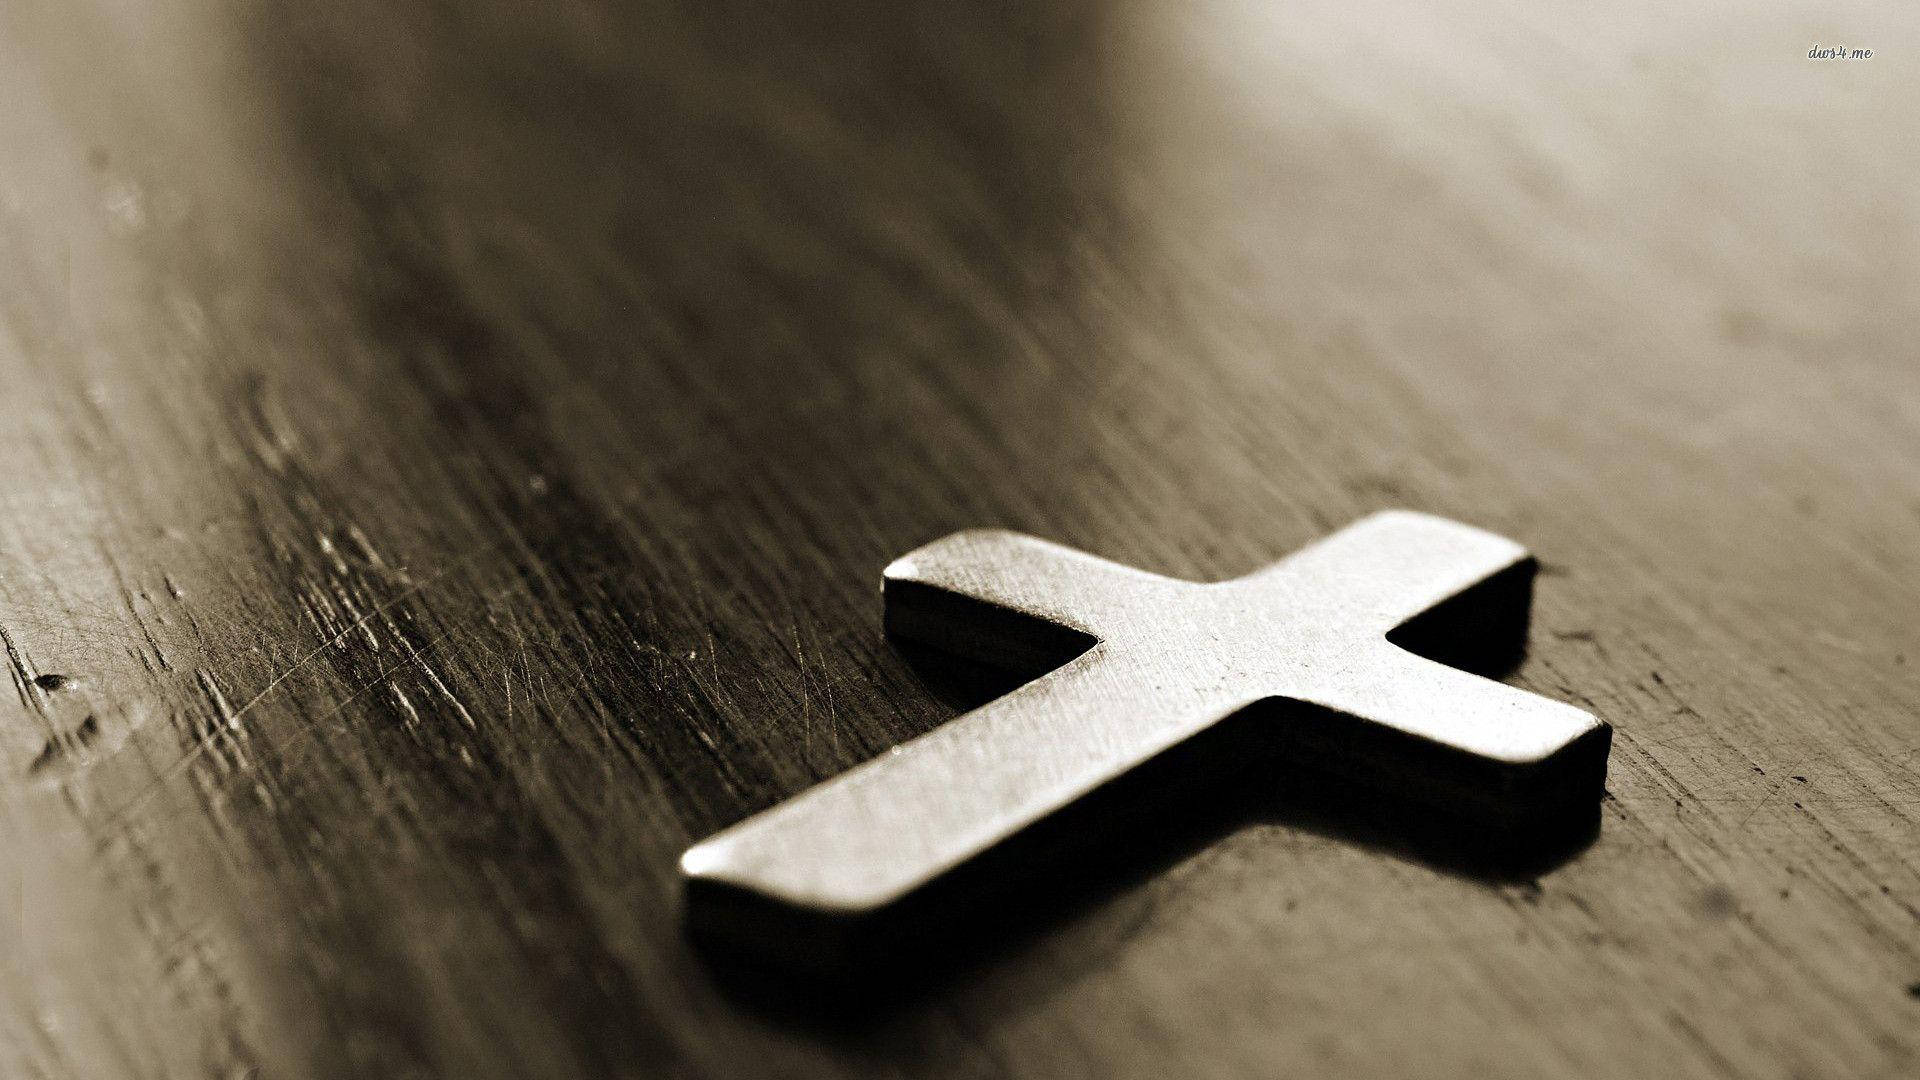 Cross 1920X1080 Wallpaper and Background Image